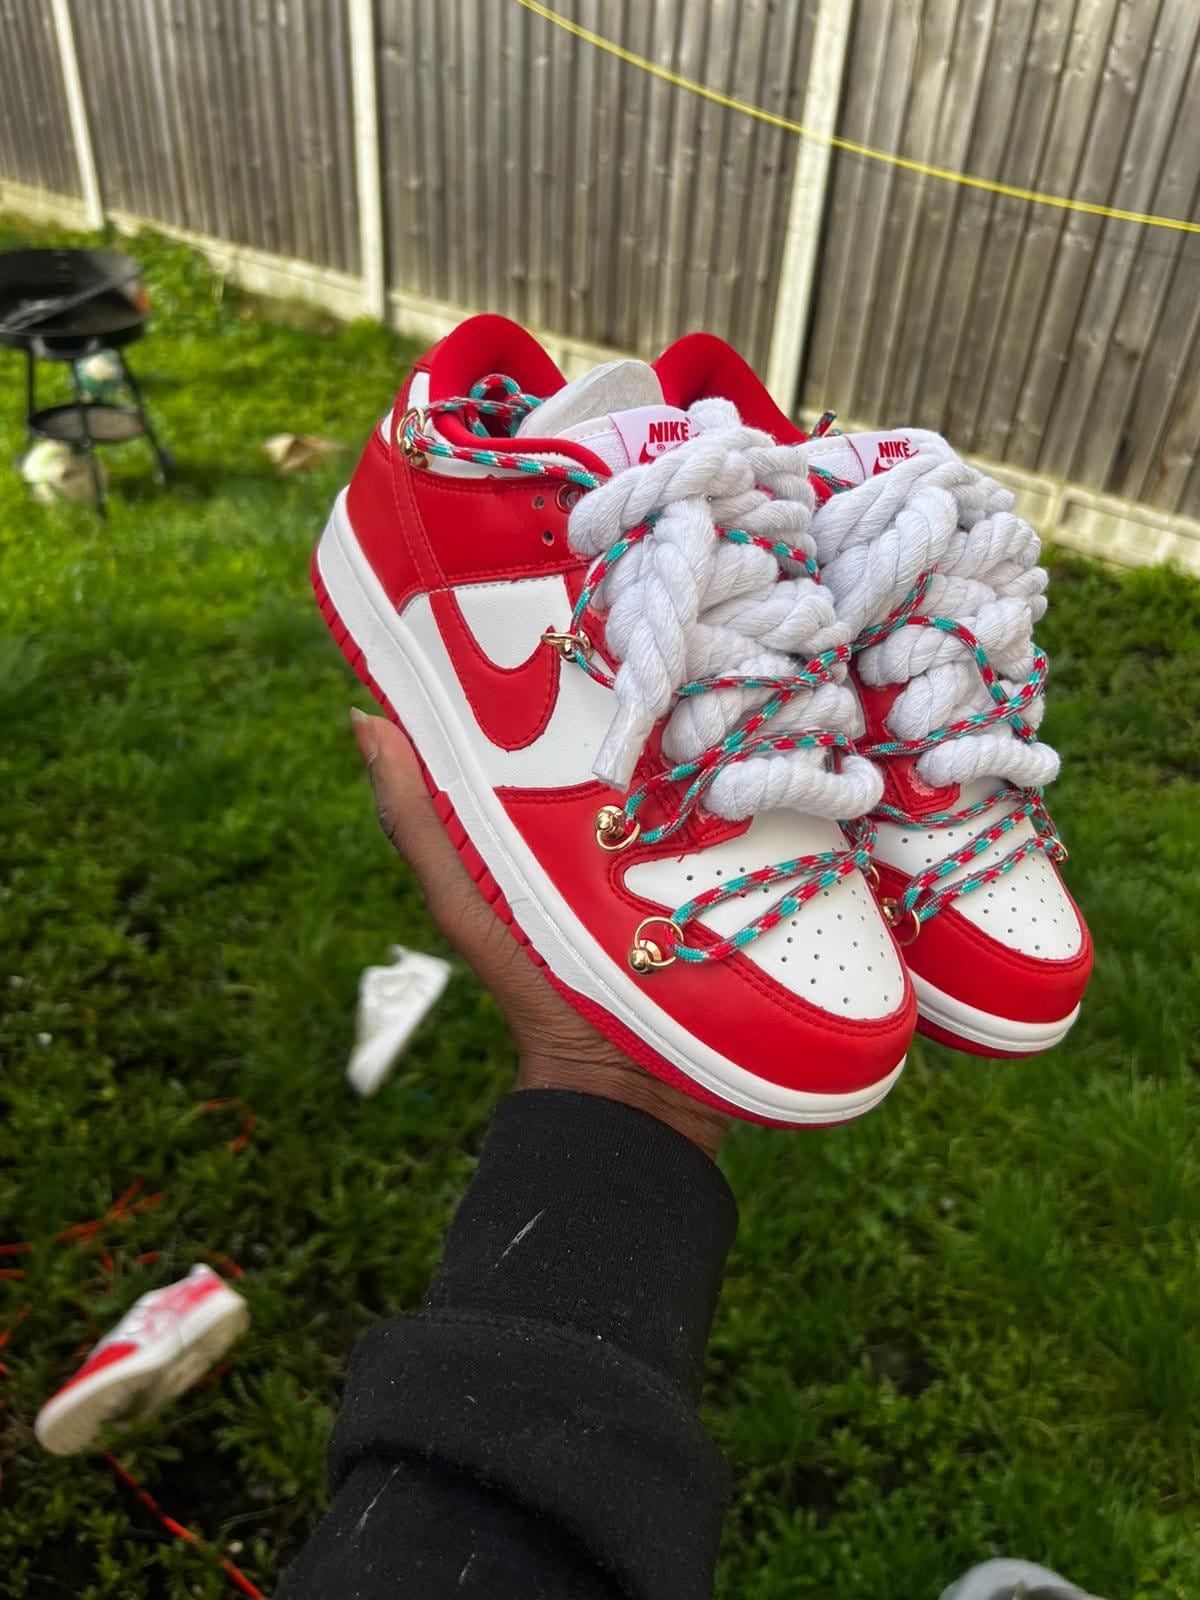 EXTRA Thick Rope Shoe Laces, Travis SB Dunk AJ off White, Natural Twisted  Cotton Rope Af1, Chunky Laces 